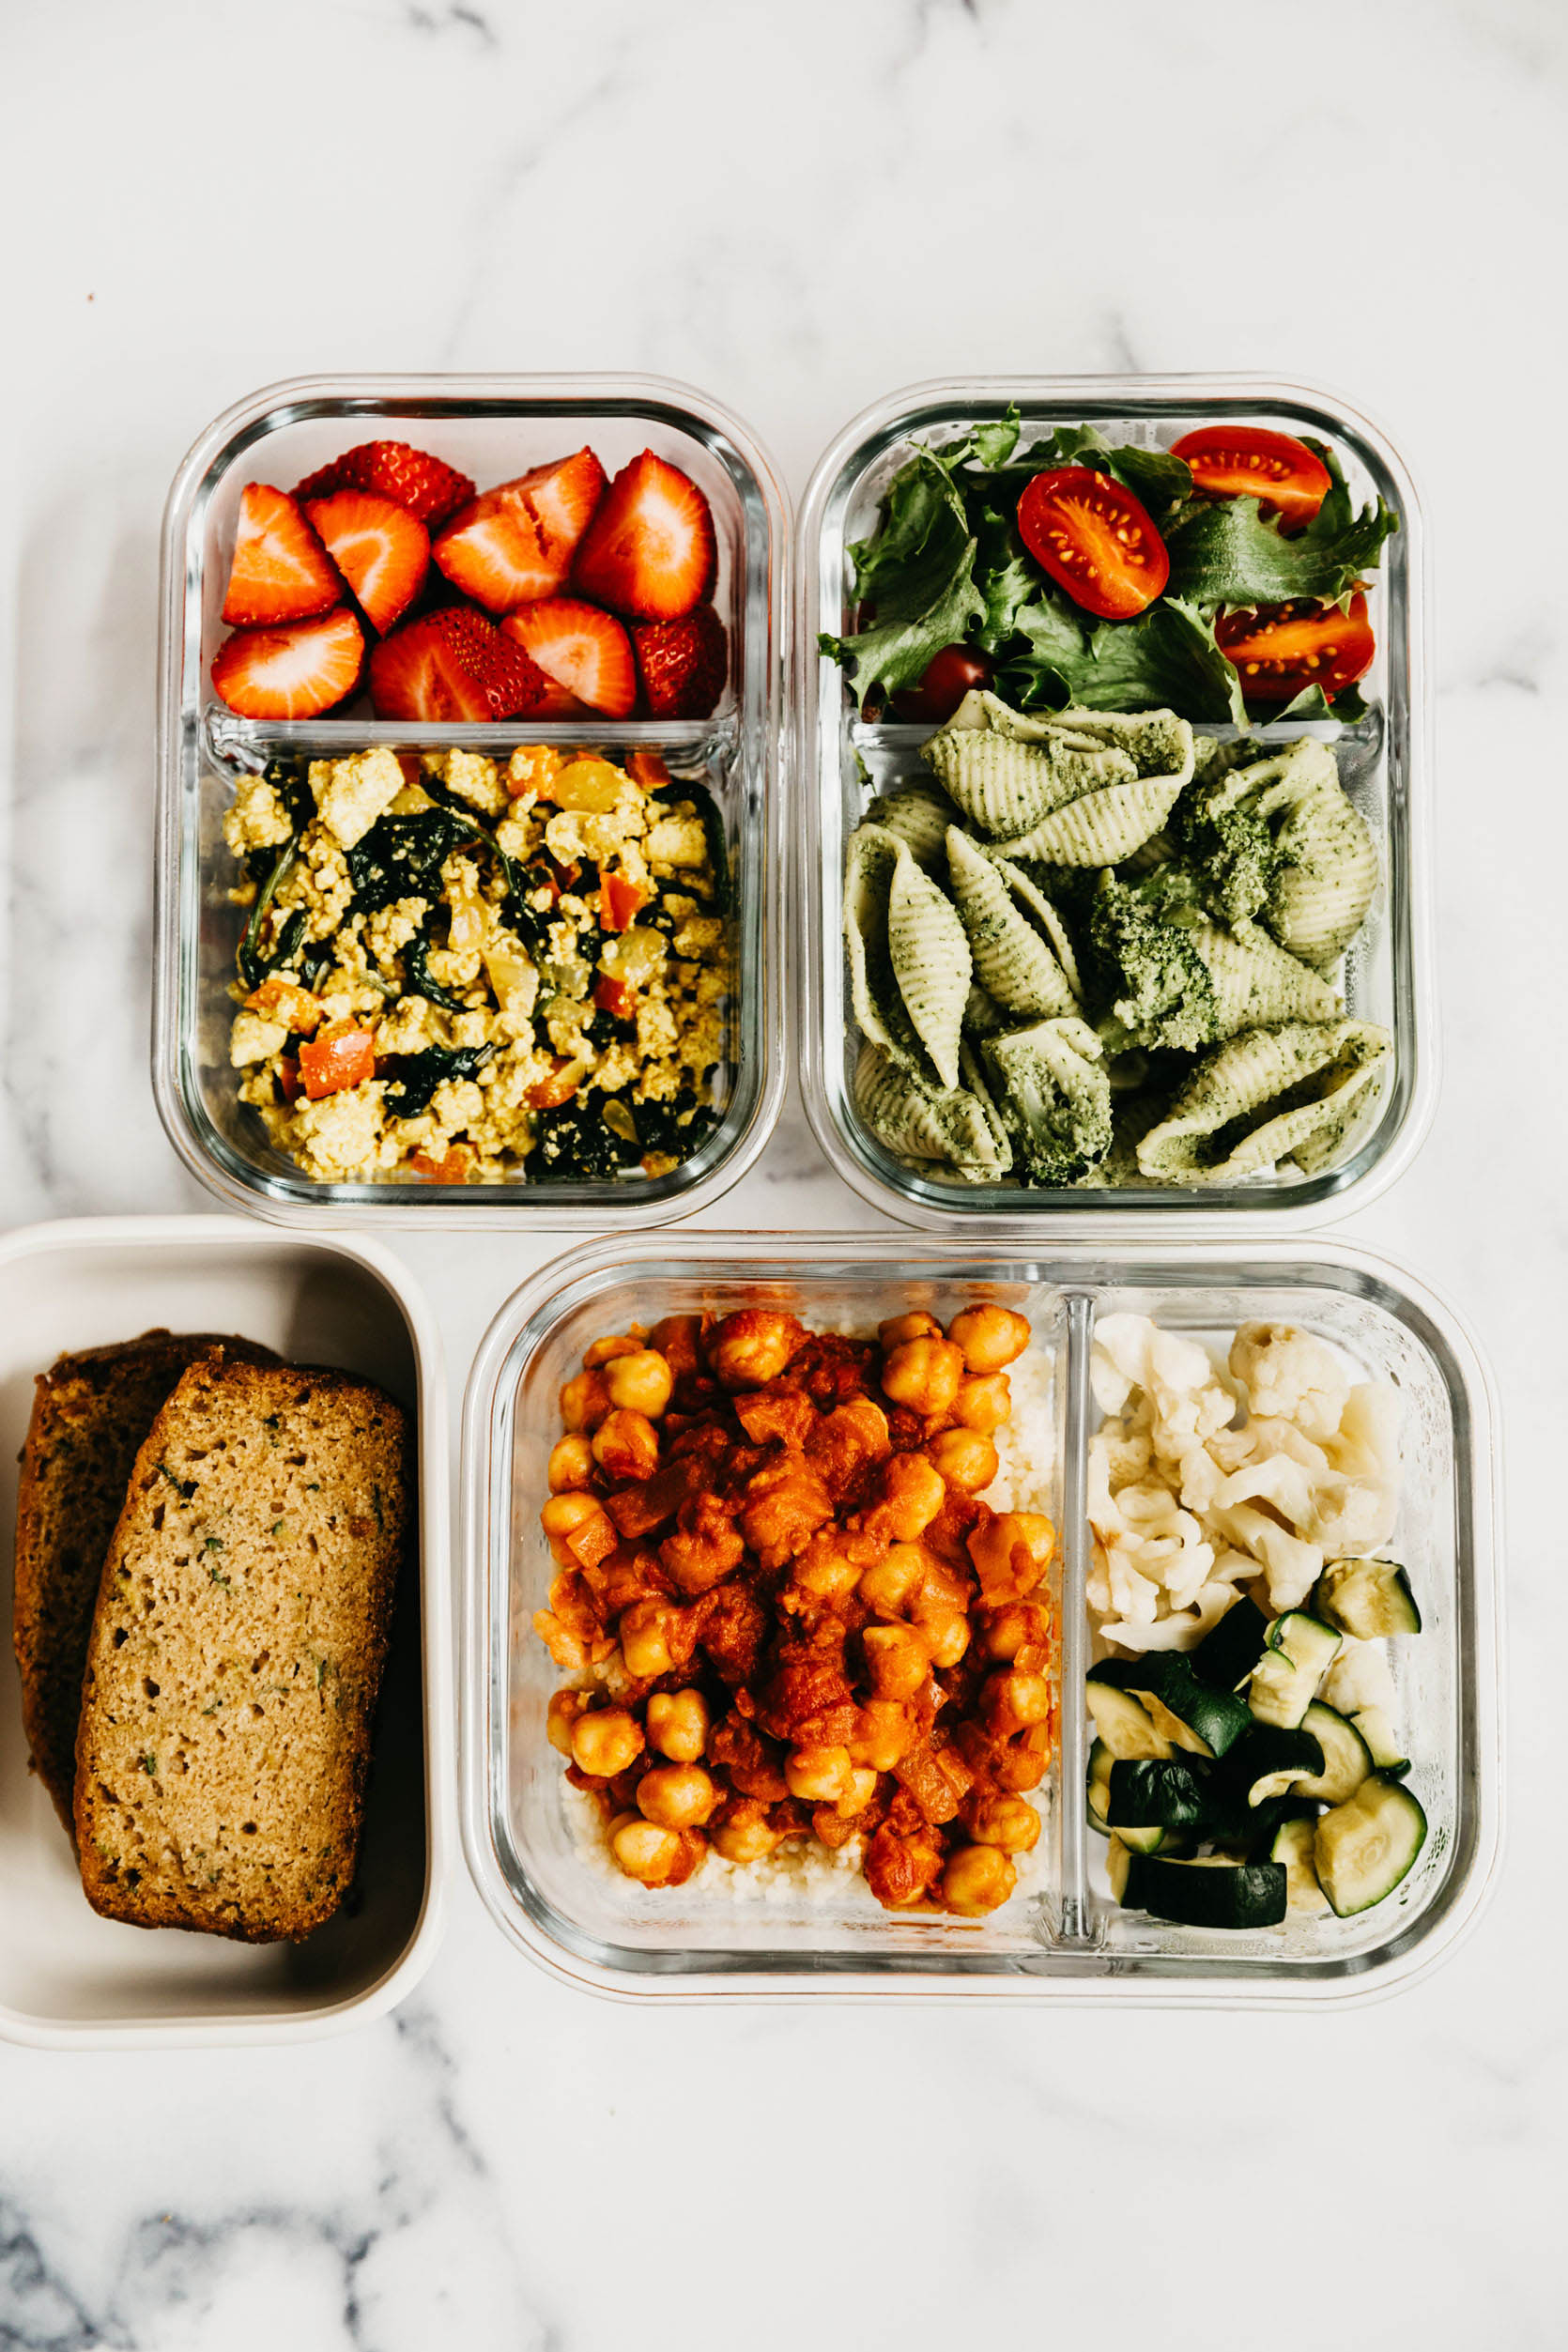 Our Guide to Cute, Healthy Vegan Bento Box Lunches